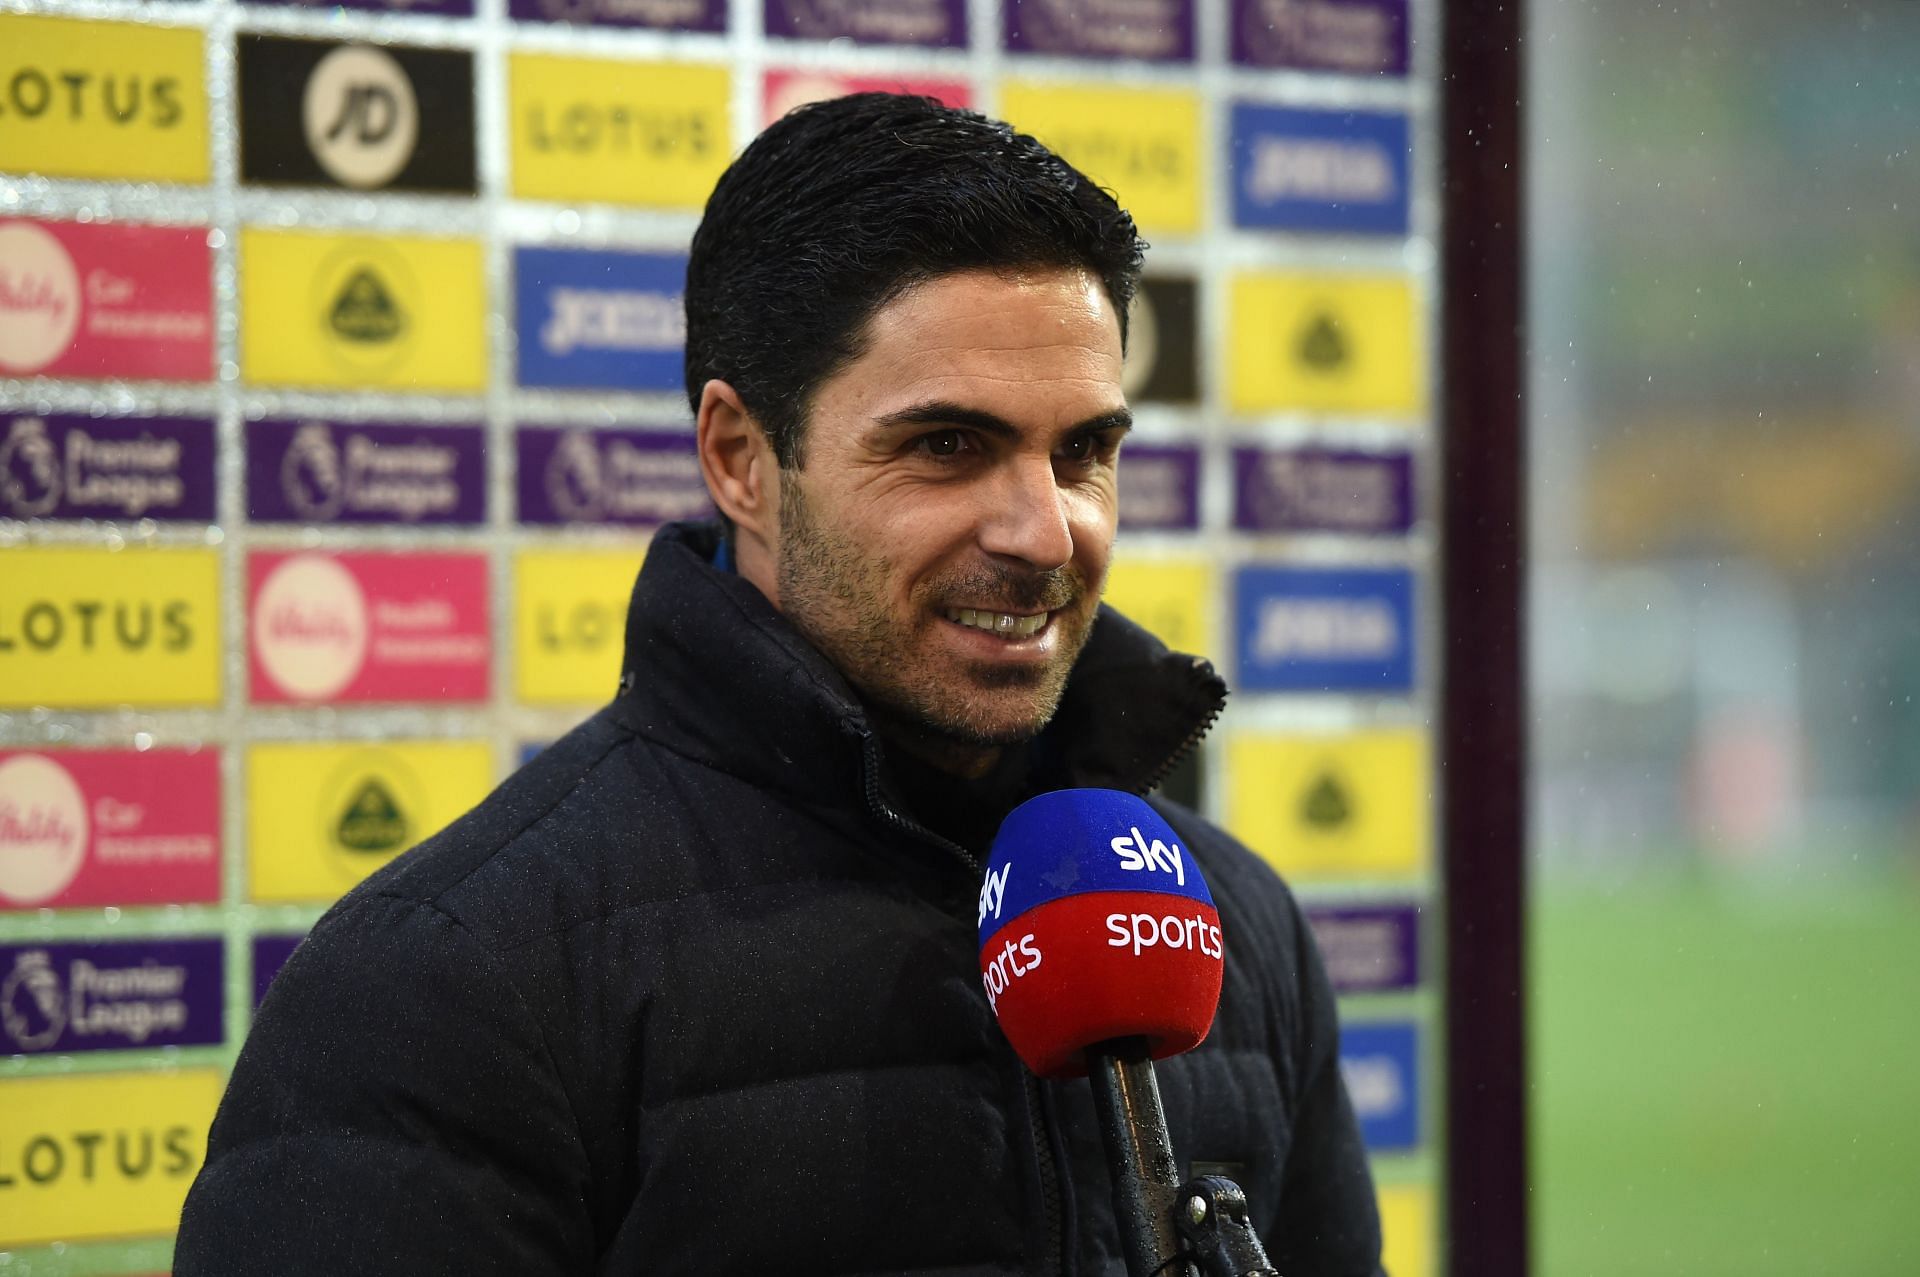 Arsenal manager Mikel Arteta has his eyes on a top-four finish.